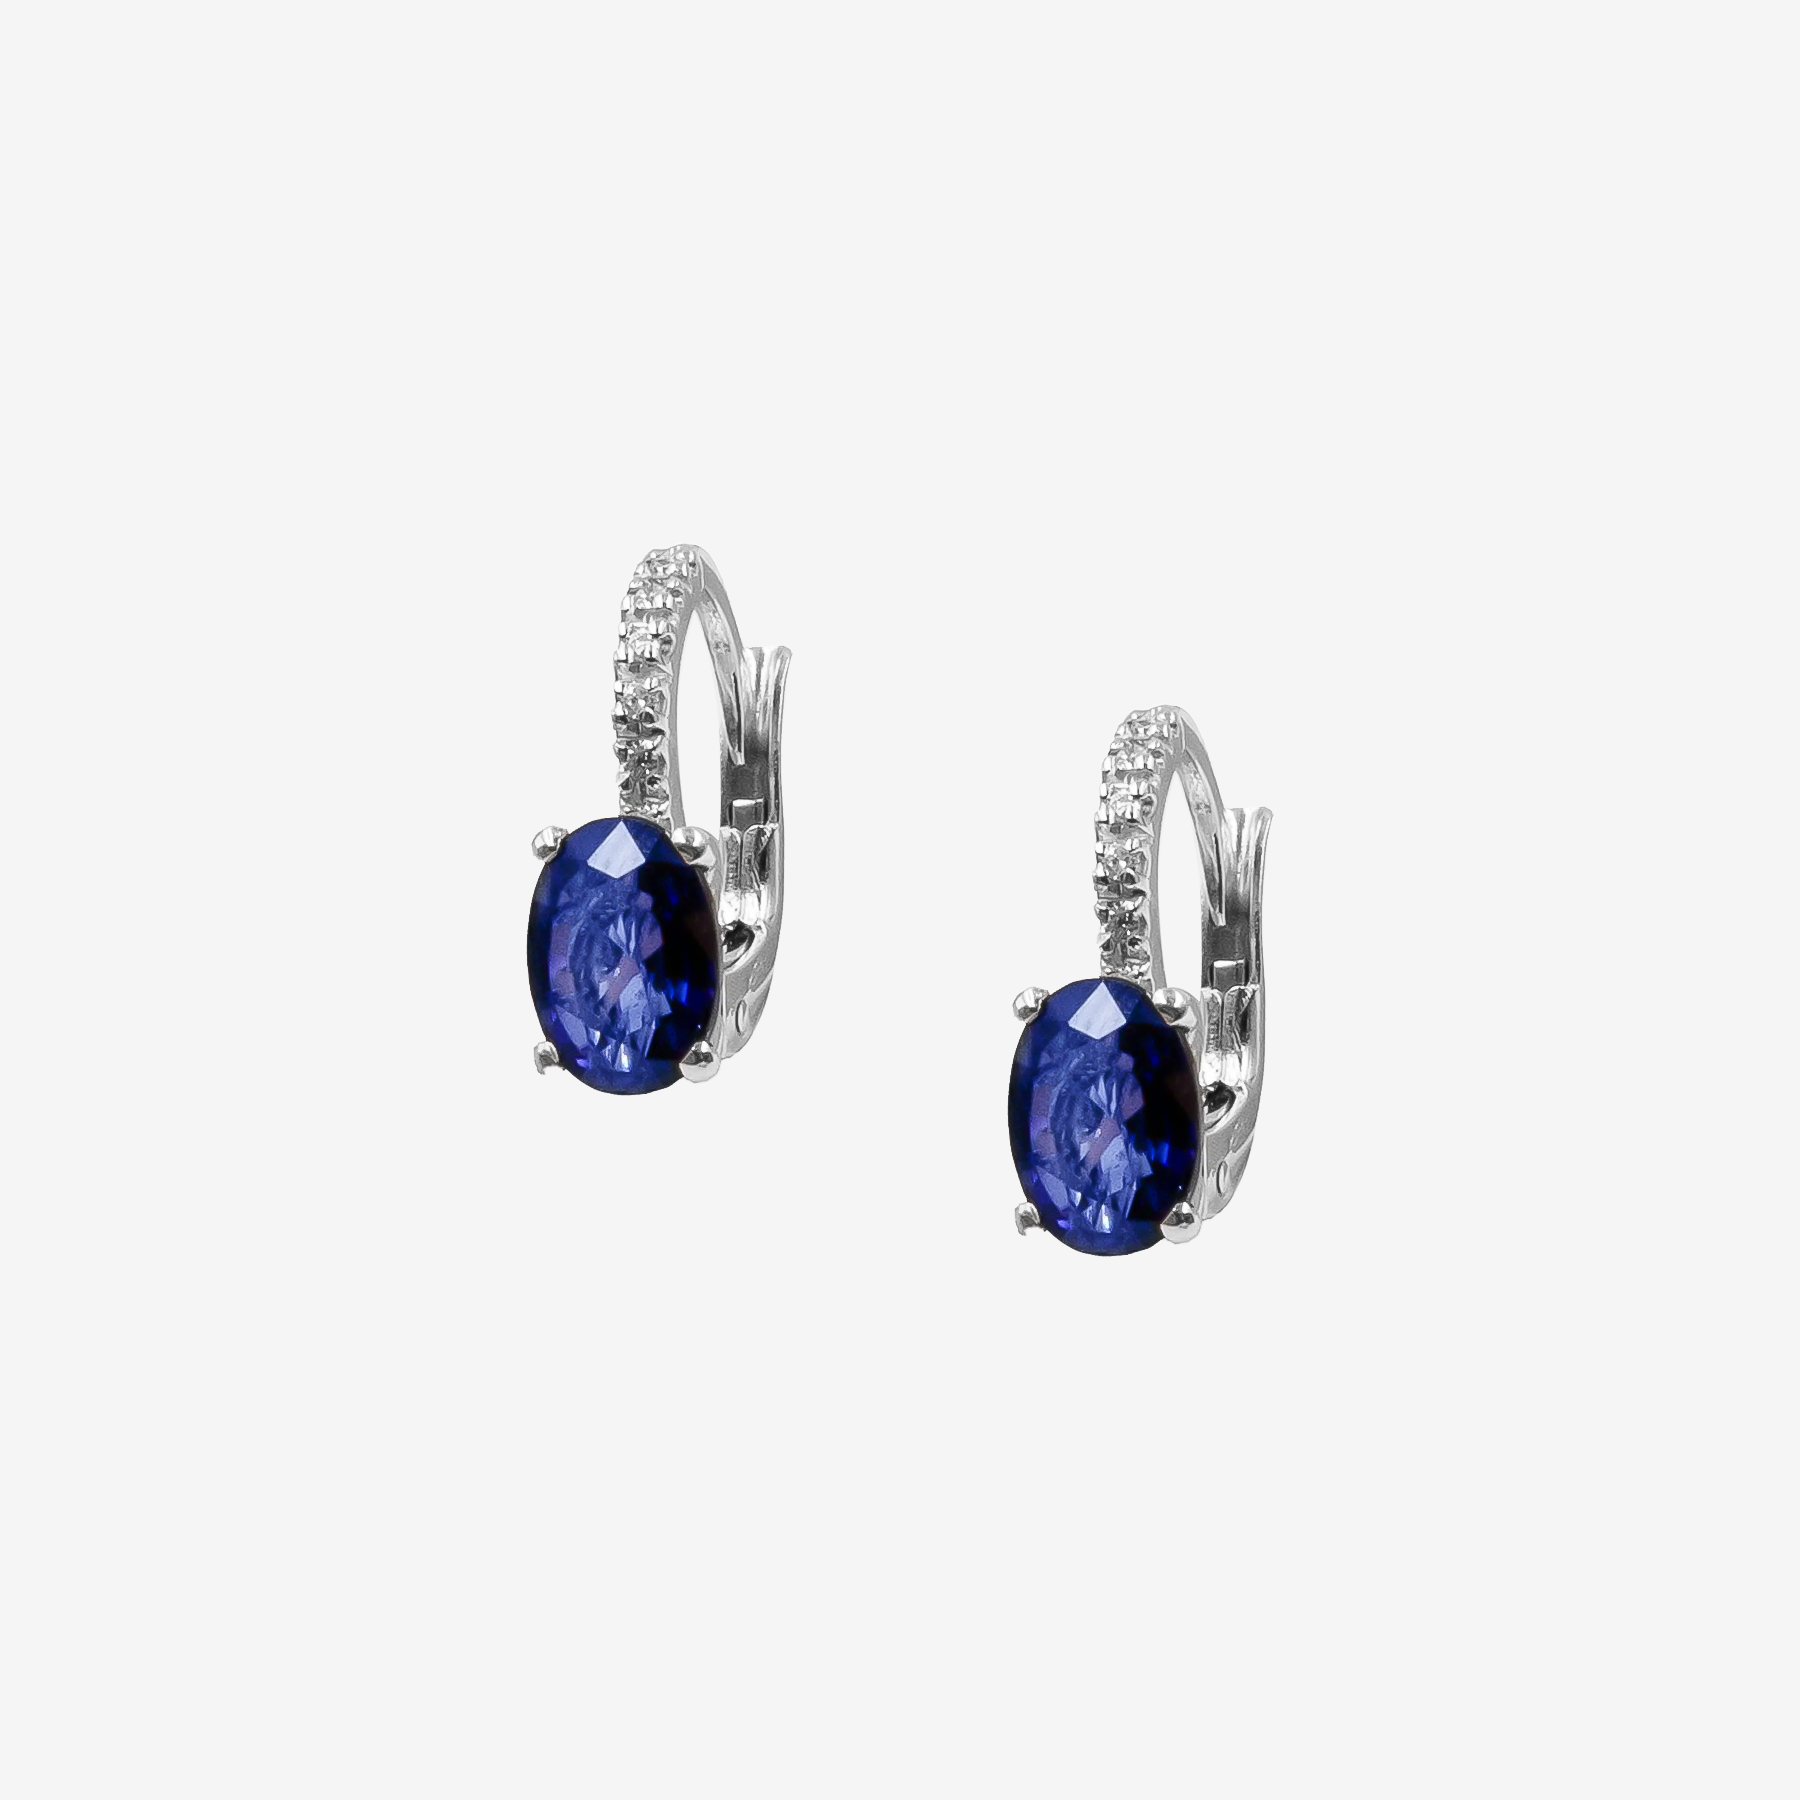 Earrings with Sapphires and Diamonds